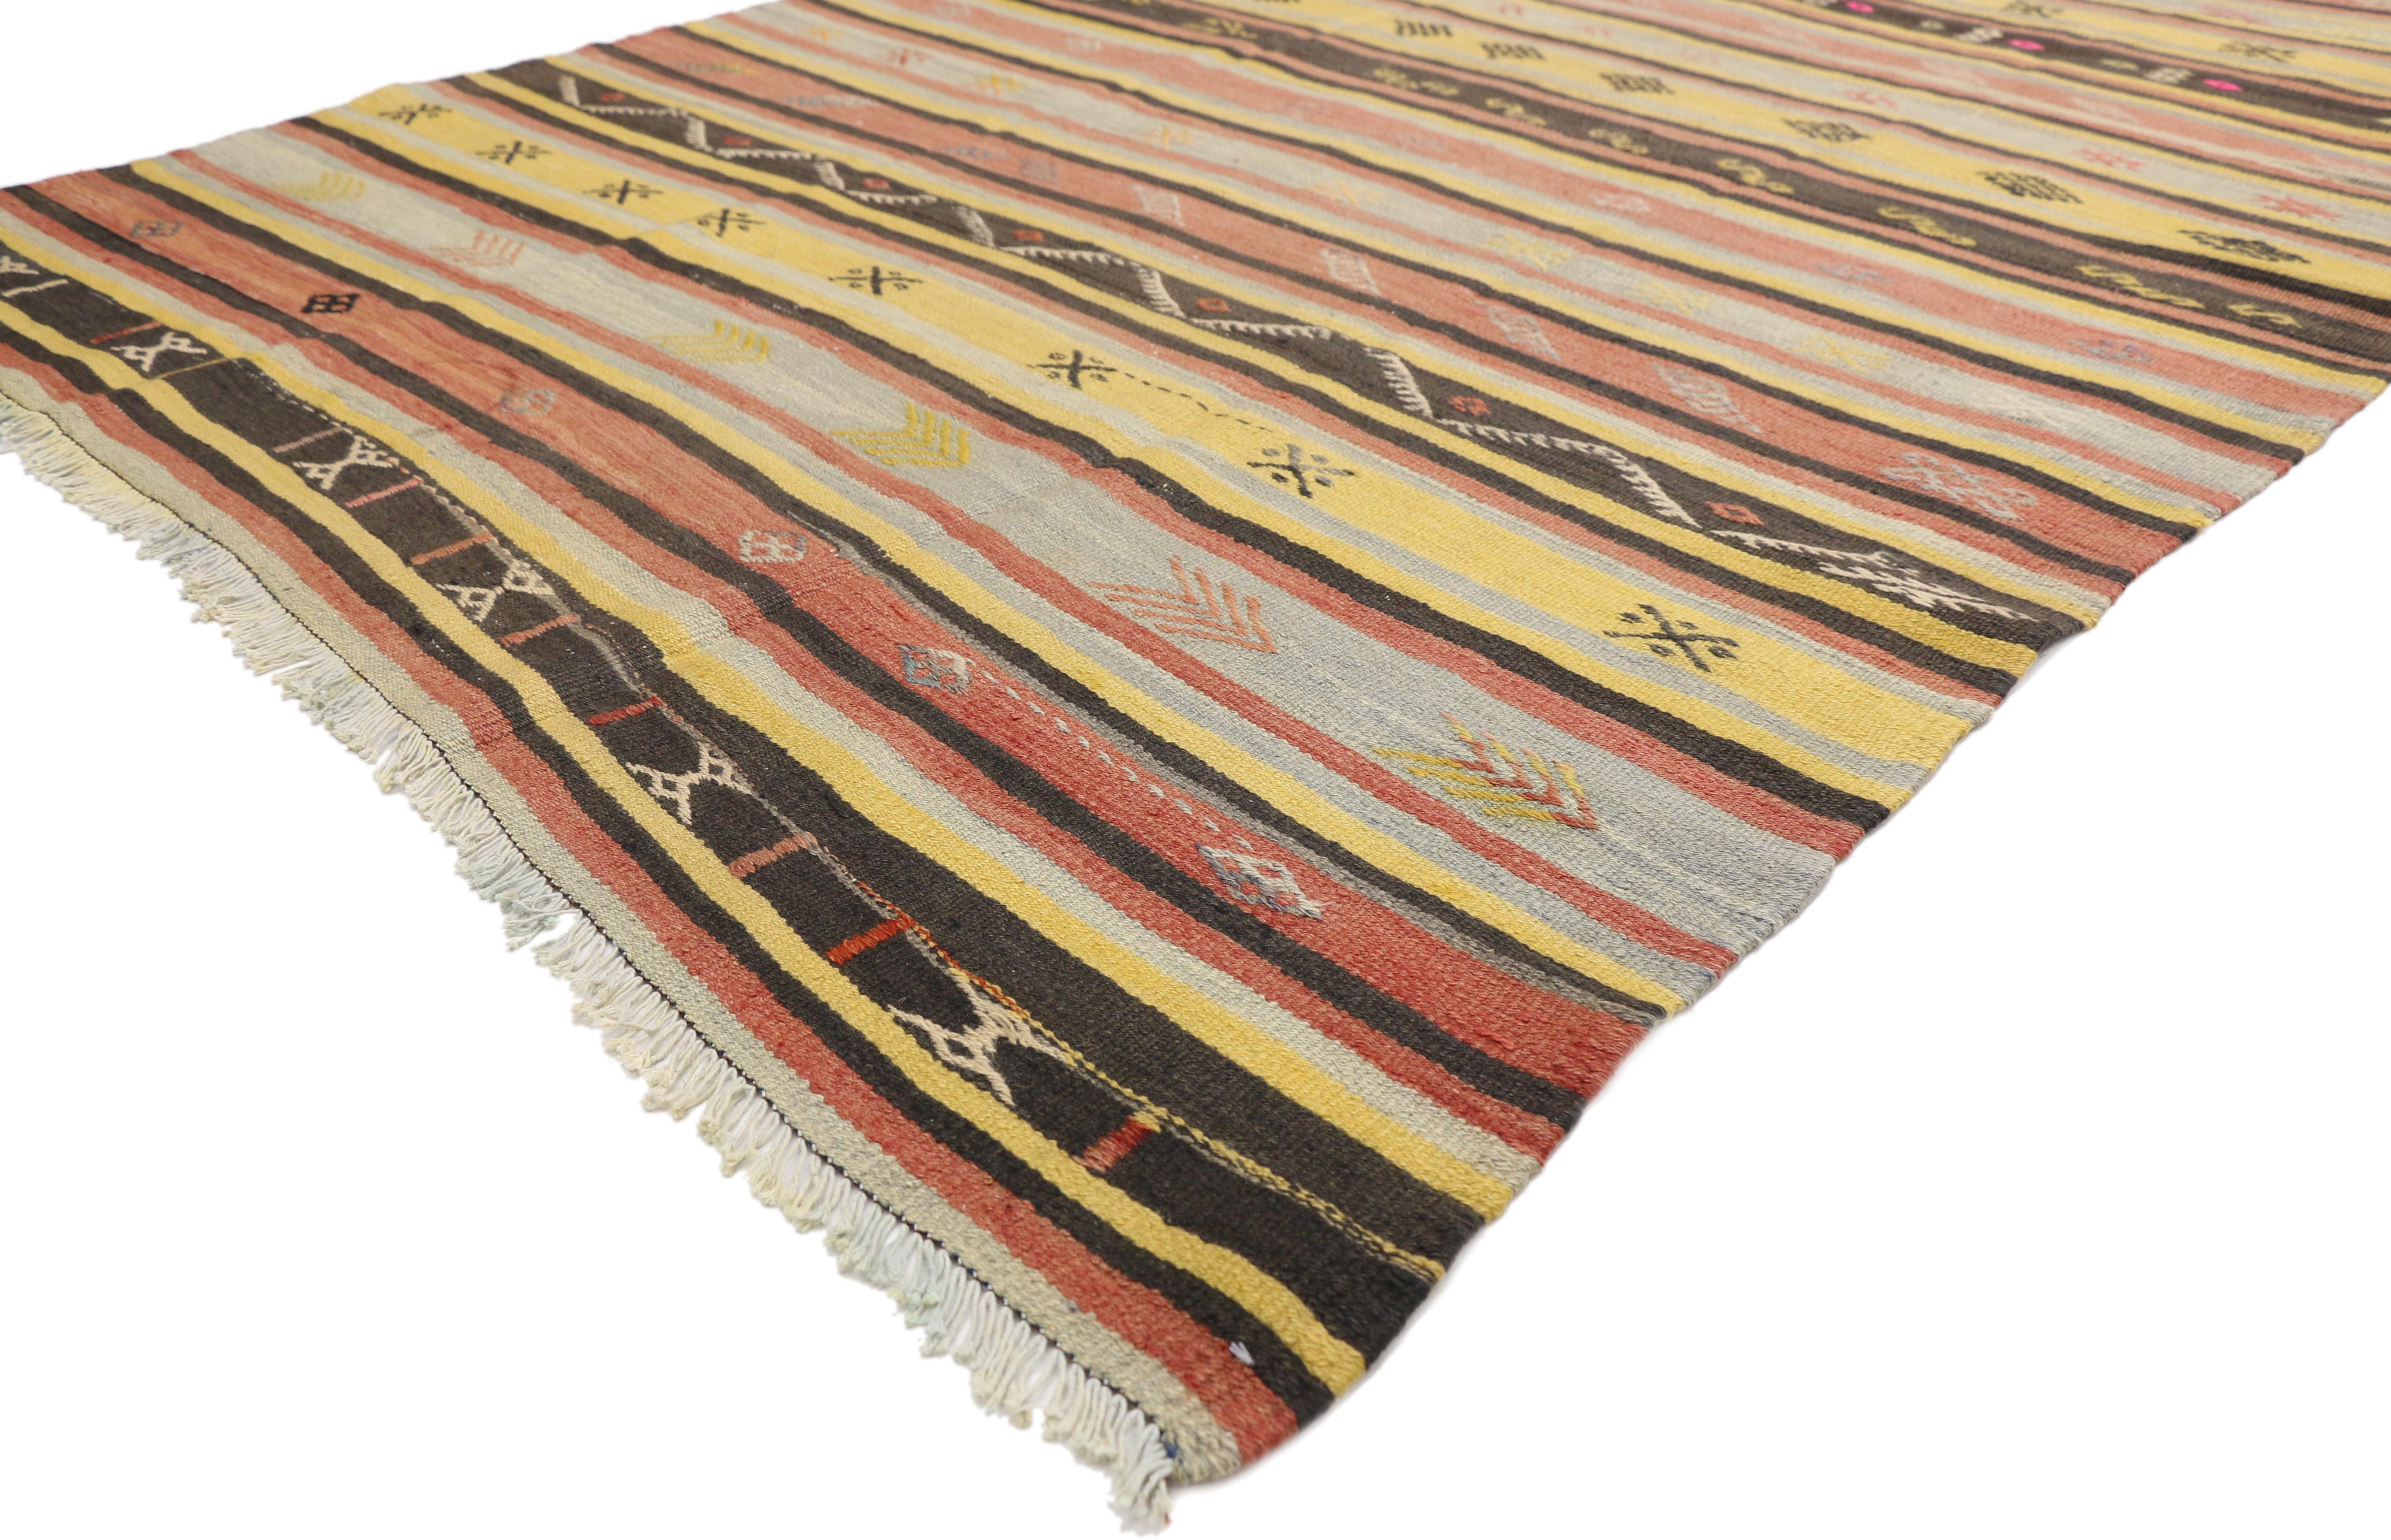 51280, vintage Turkish Kilim rug, flat-weave Kilim Tribal rug. This handwoven wool vintage Turkish Kilim rug features alternating bands composed of ancient tribal motifs and stripes. This Kilim rug is rich in Turkish culture, as the symbolic motifs